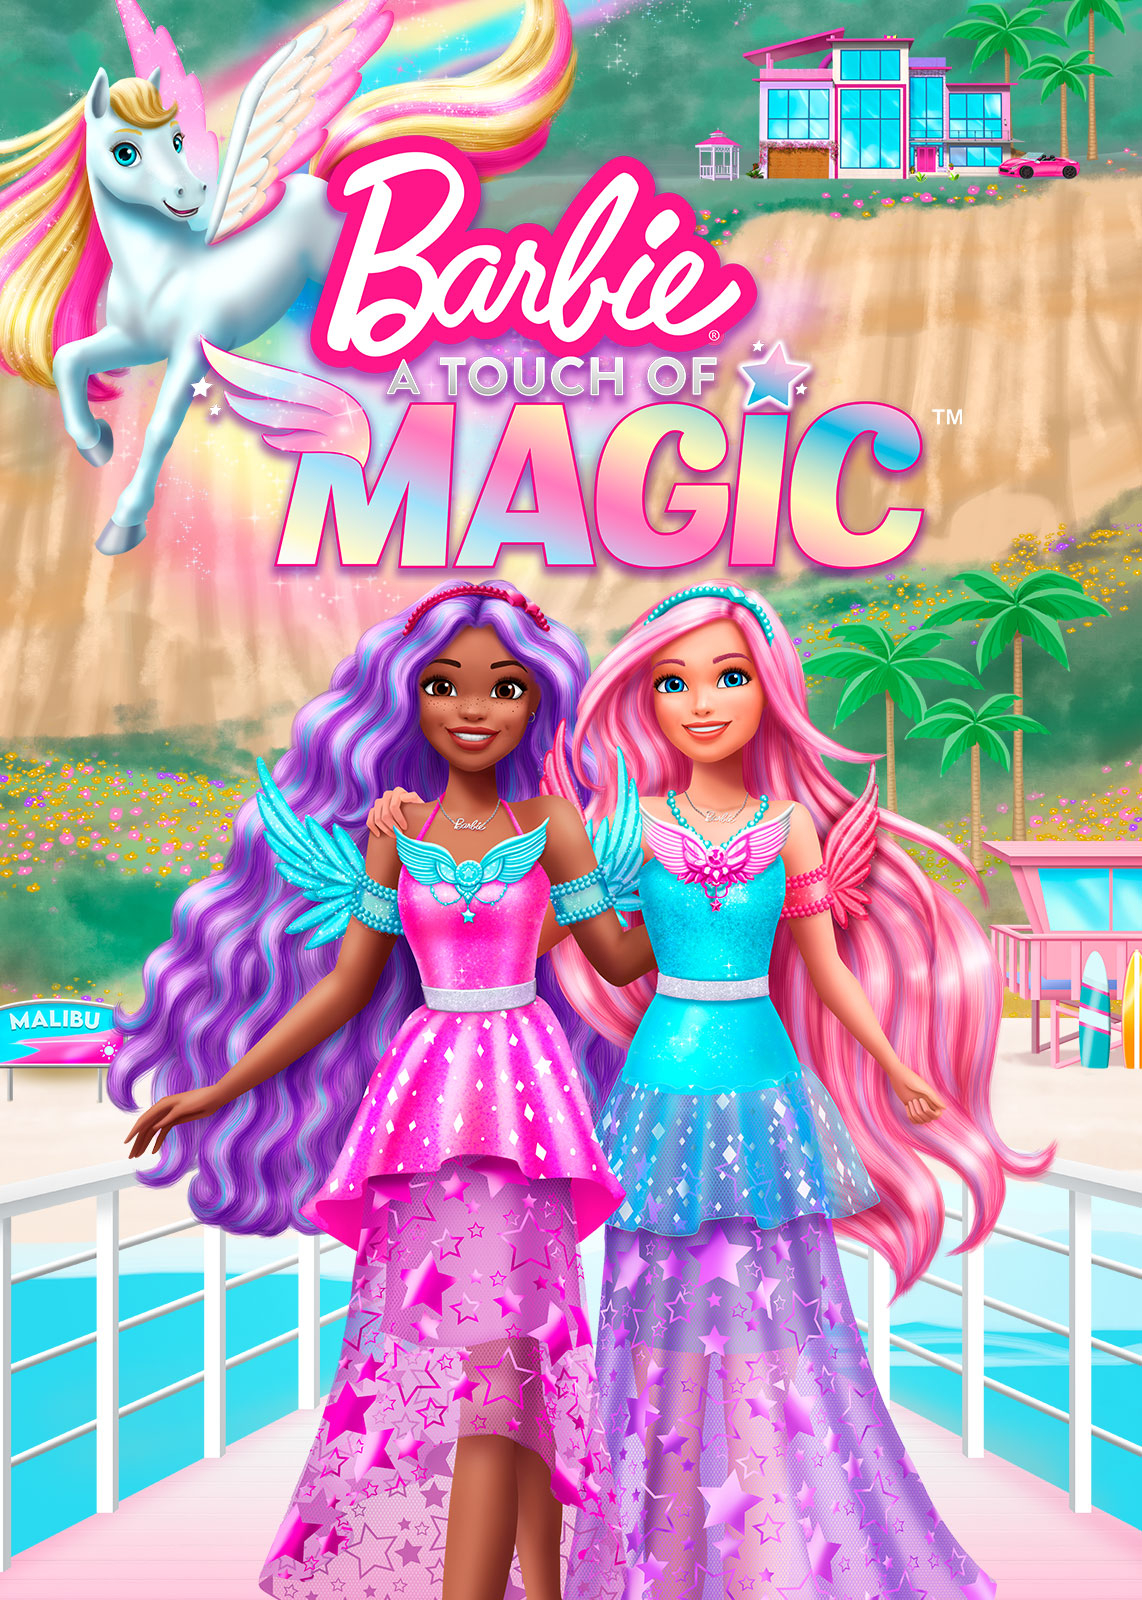 Barbie - Welcome to Barbie Dreamtopia! A magical new series from